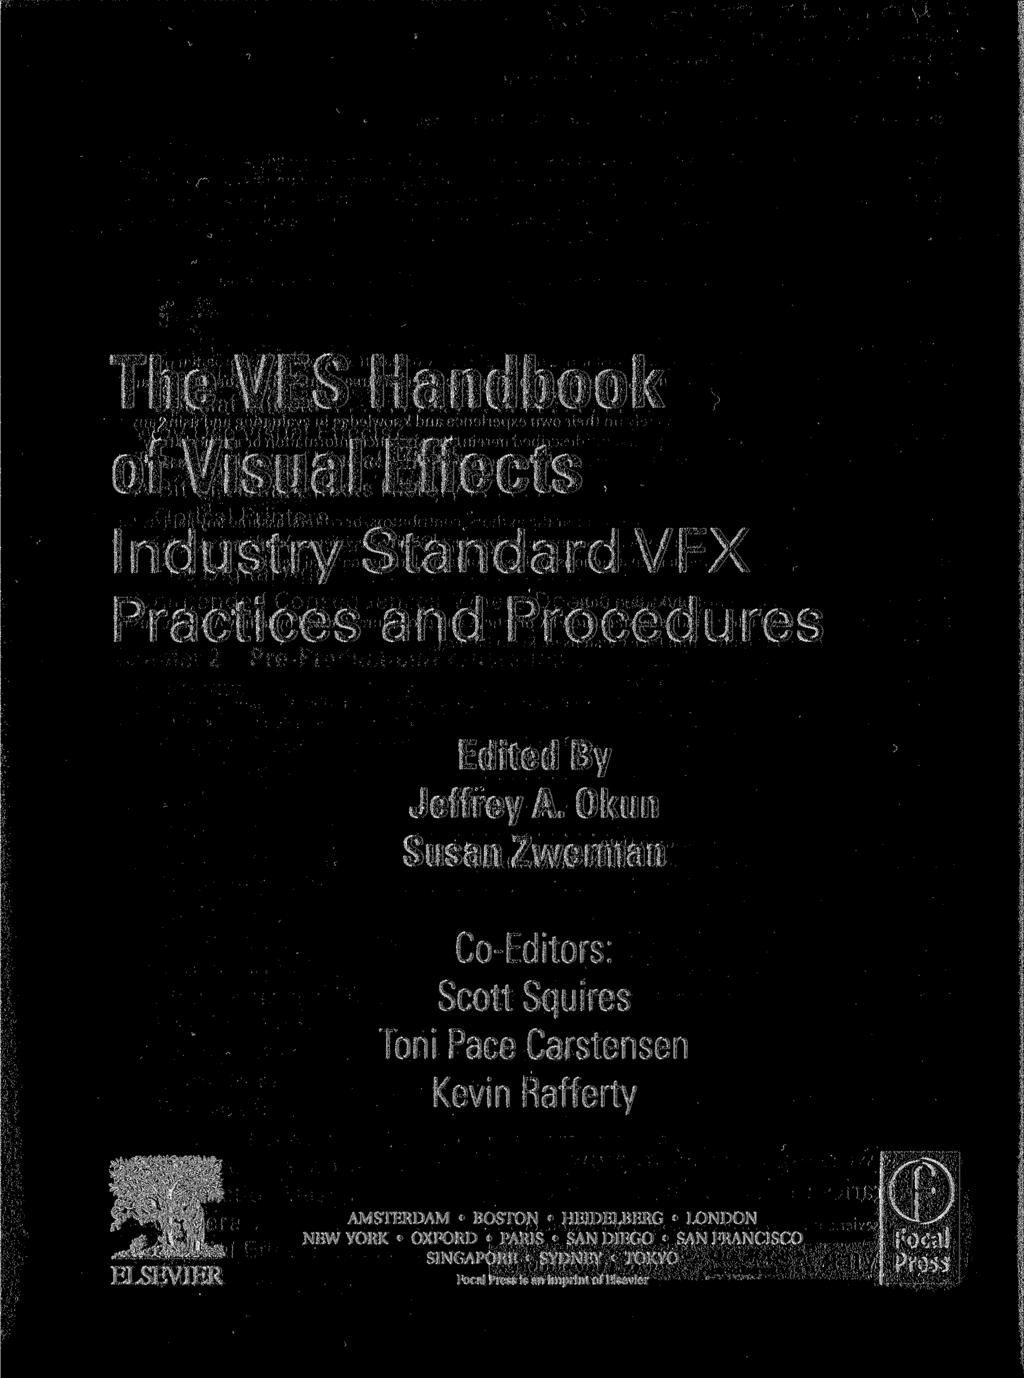 ' The VES Handbook of Visual Effects Industry Standard VFX Practices and Procedures Edited By Jeffrey A.